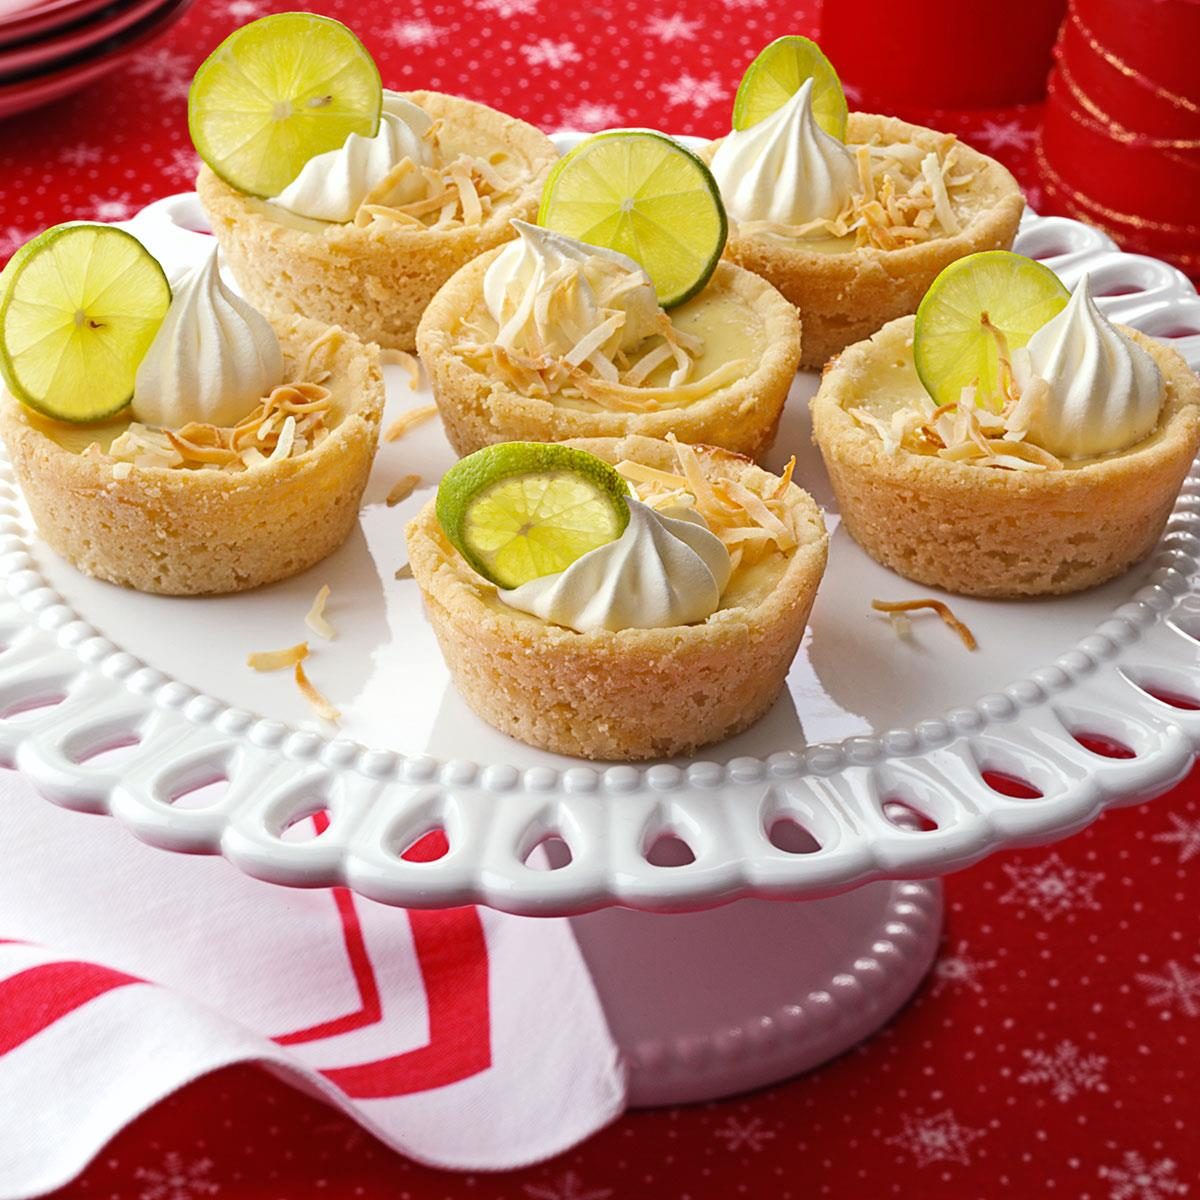 Mini Key Lime and Coconut Pies Recipe | Taste of Home